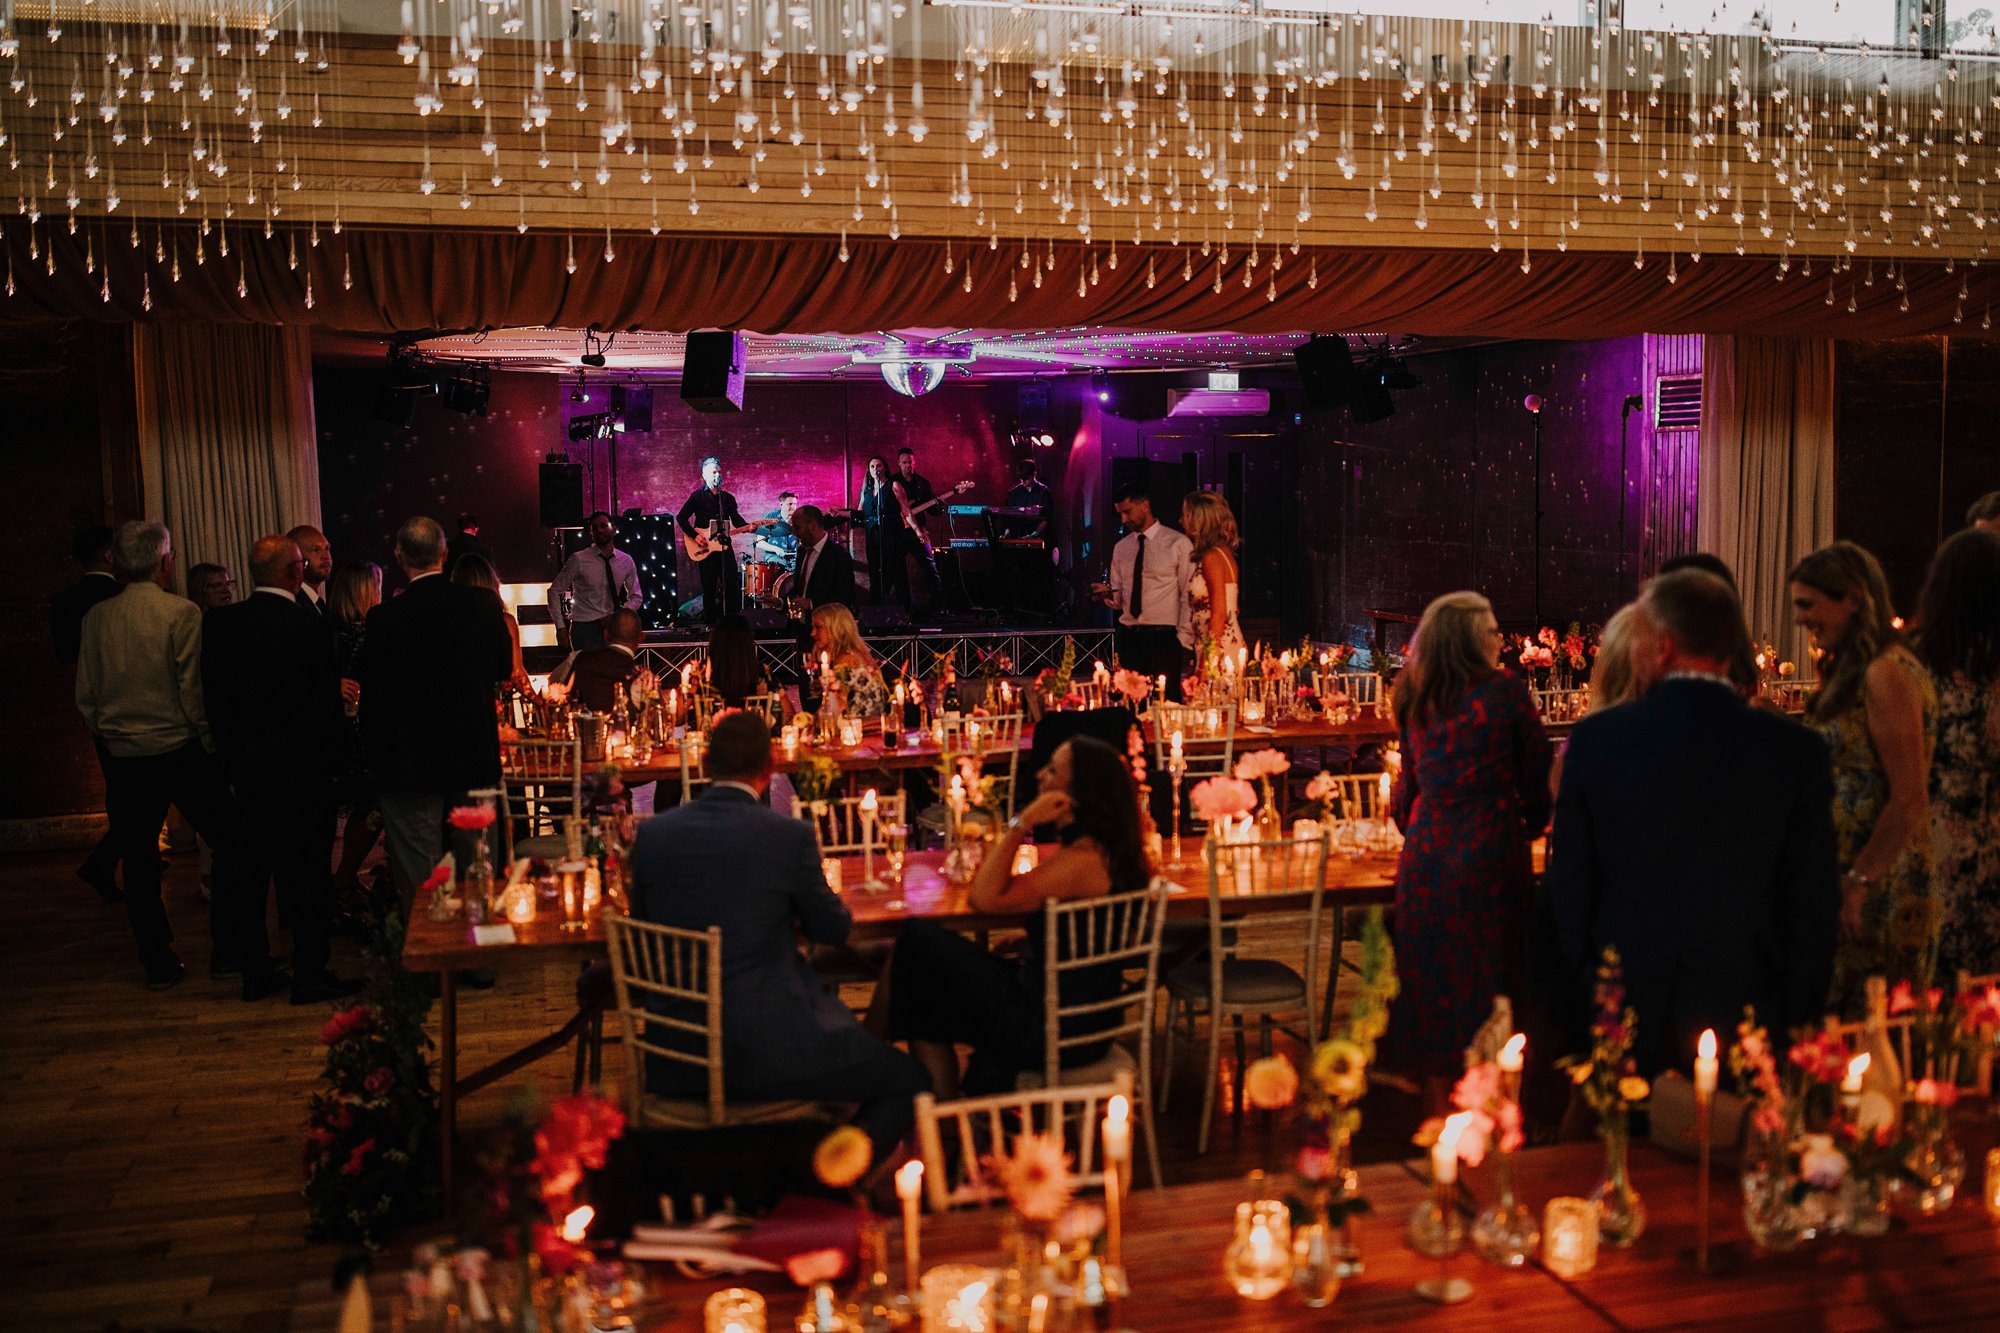 cosy wedding reception with flowers and candles flittering on tables while a band performs with a pink glowing lighting effects